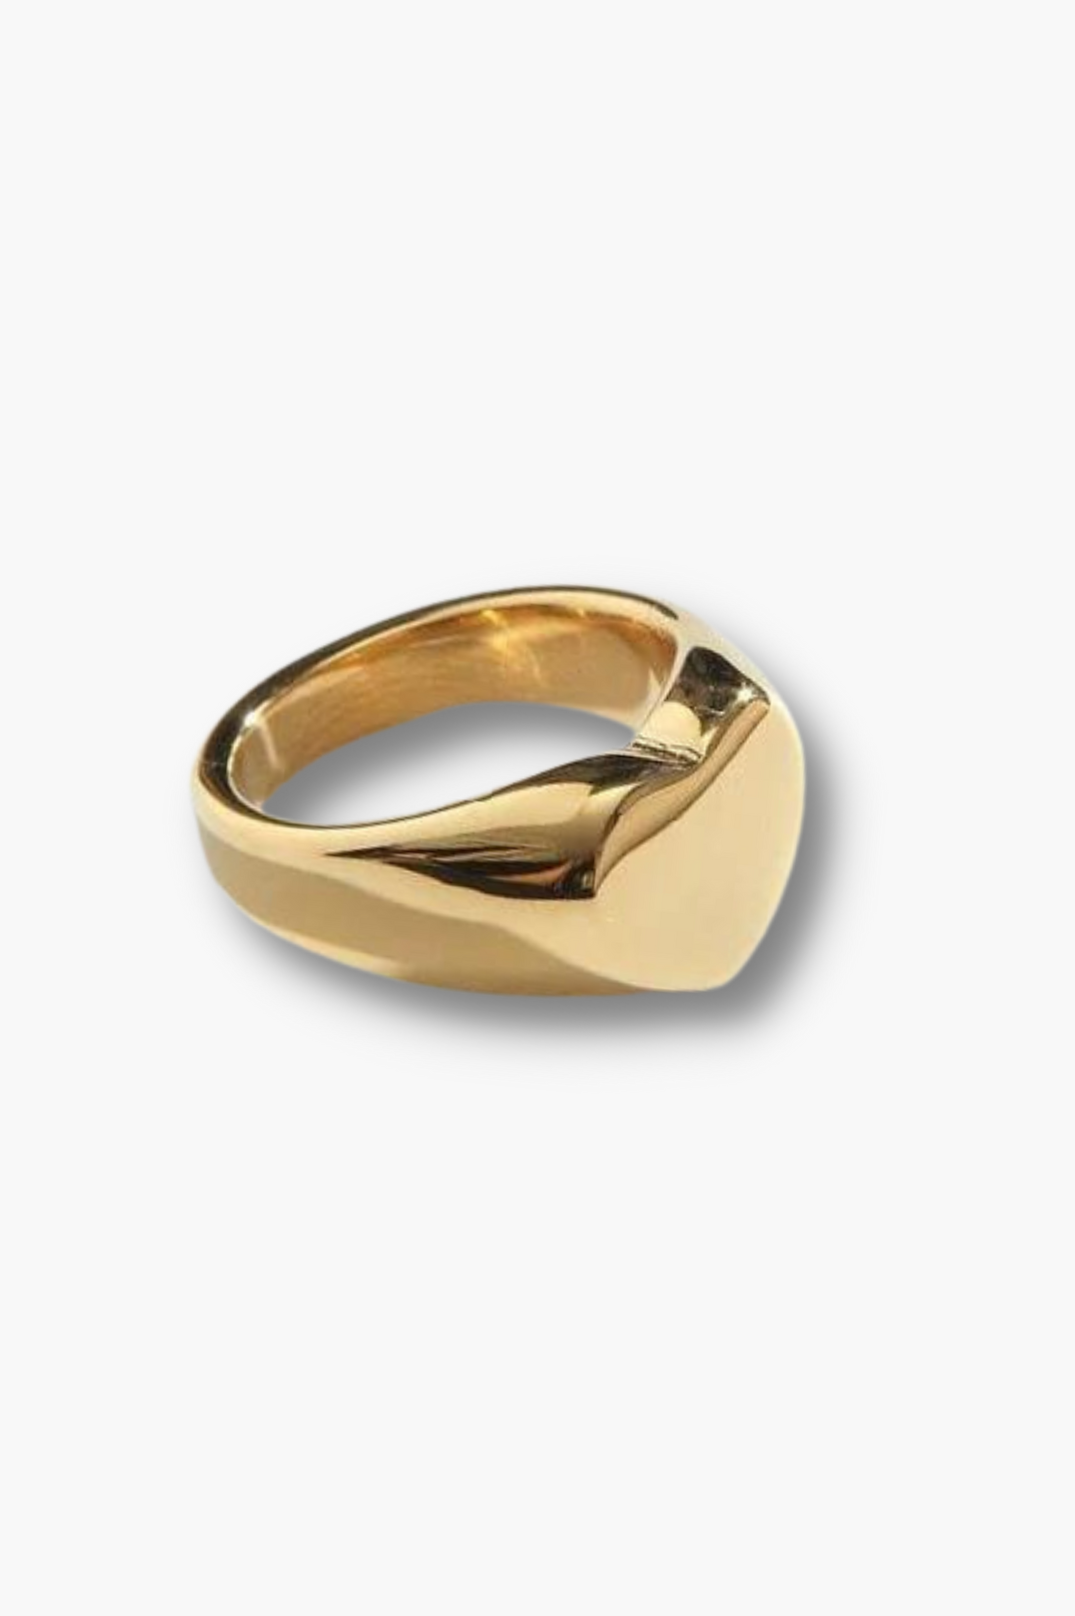 ONE TIME OFFER | French Love Lock Heart Ring